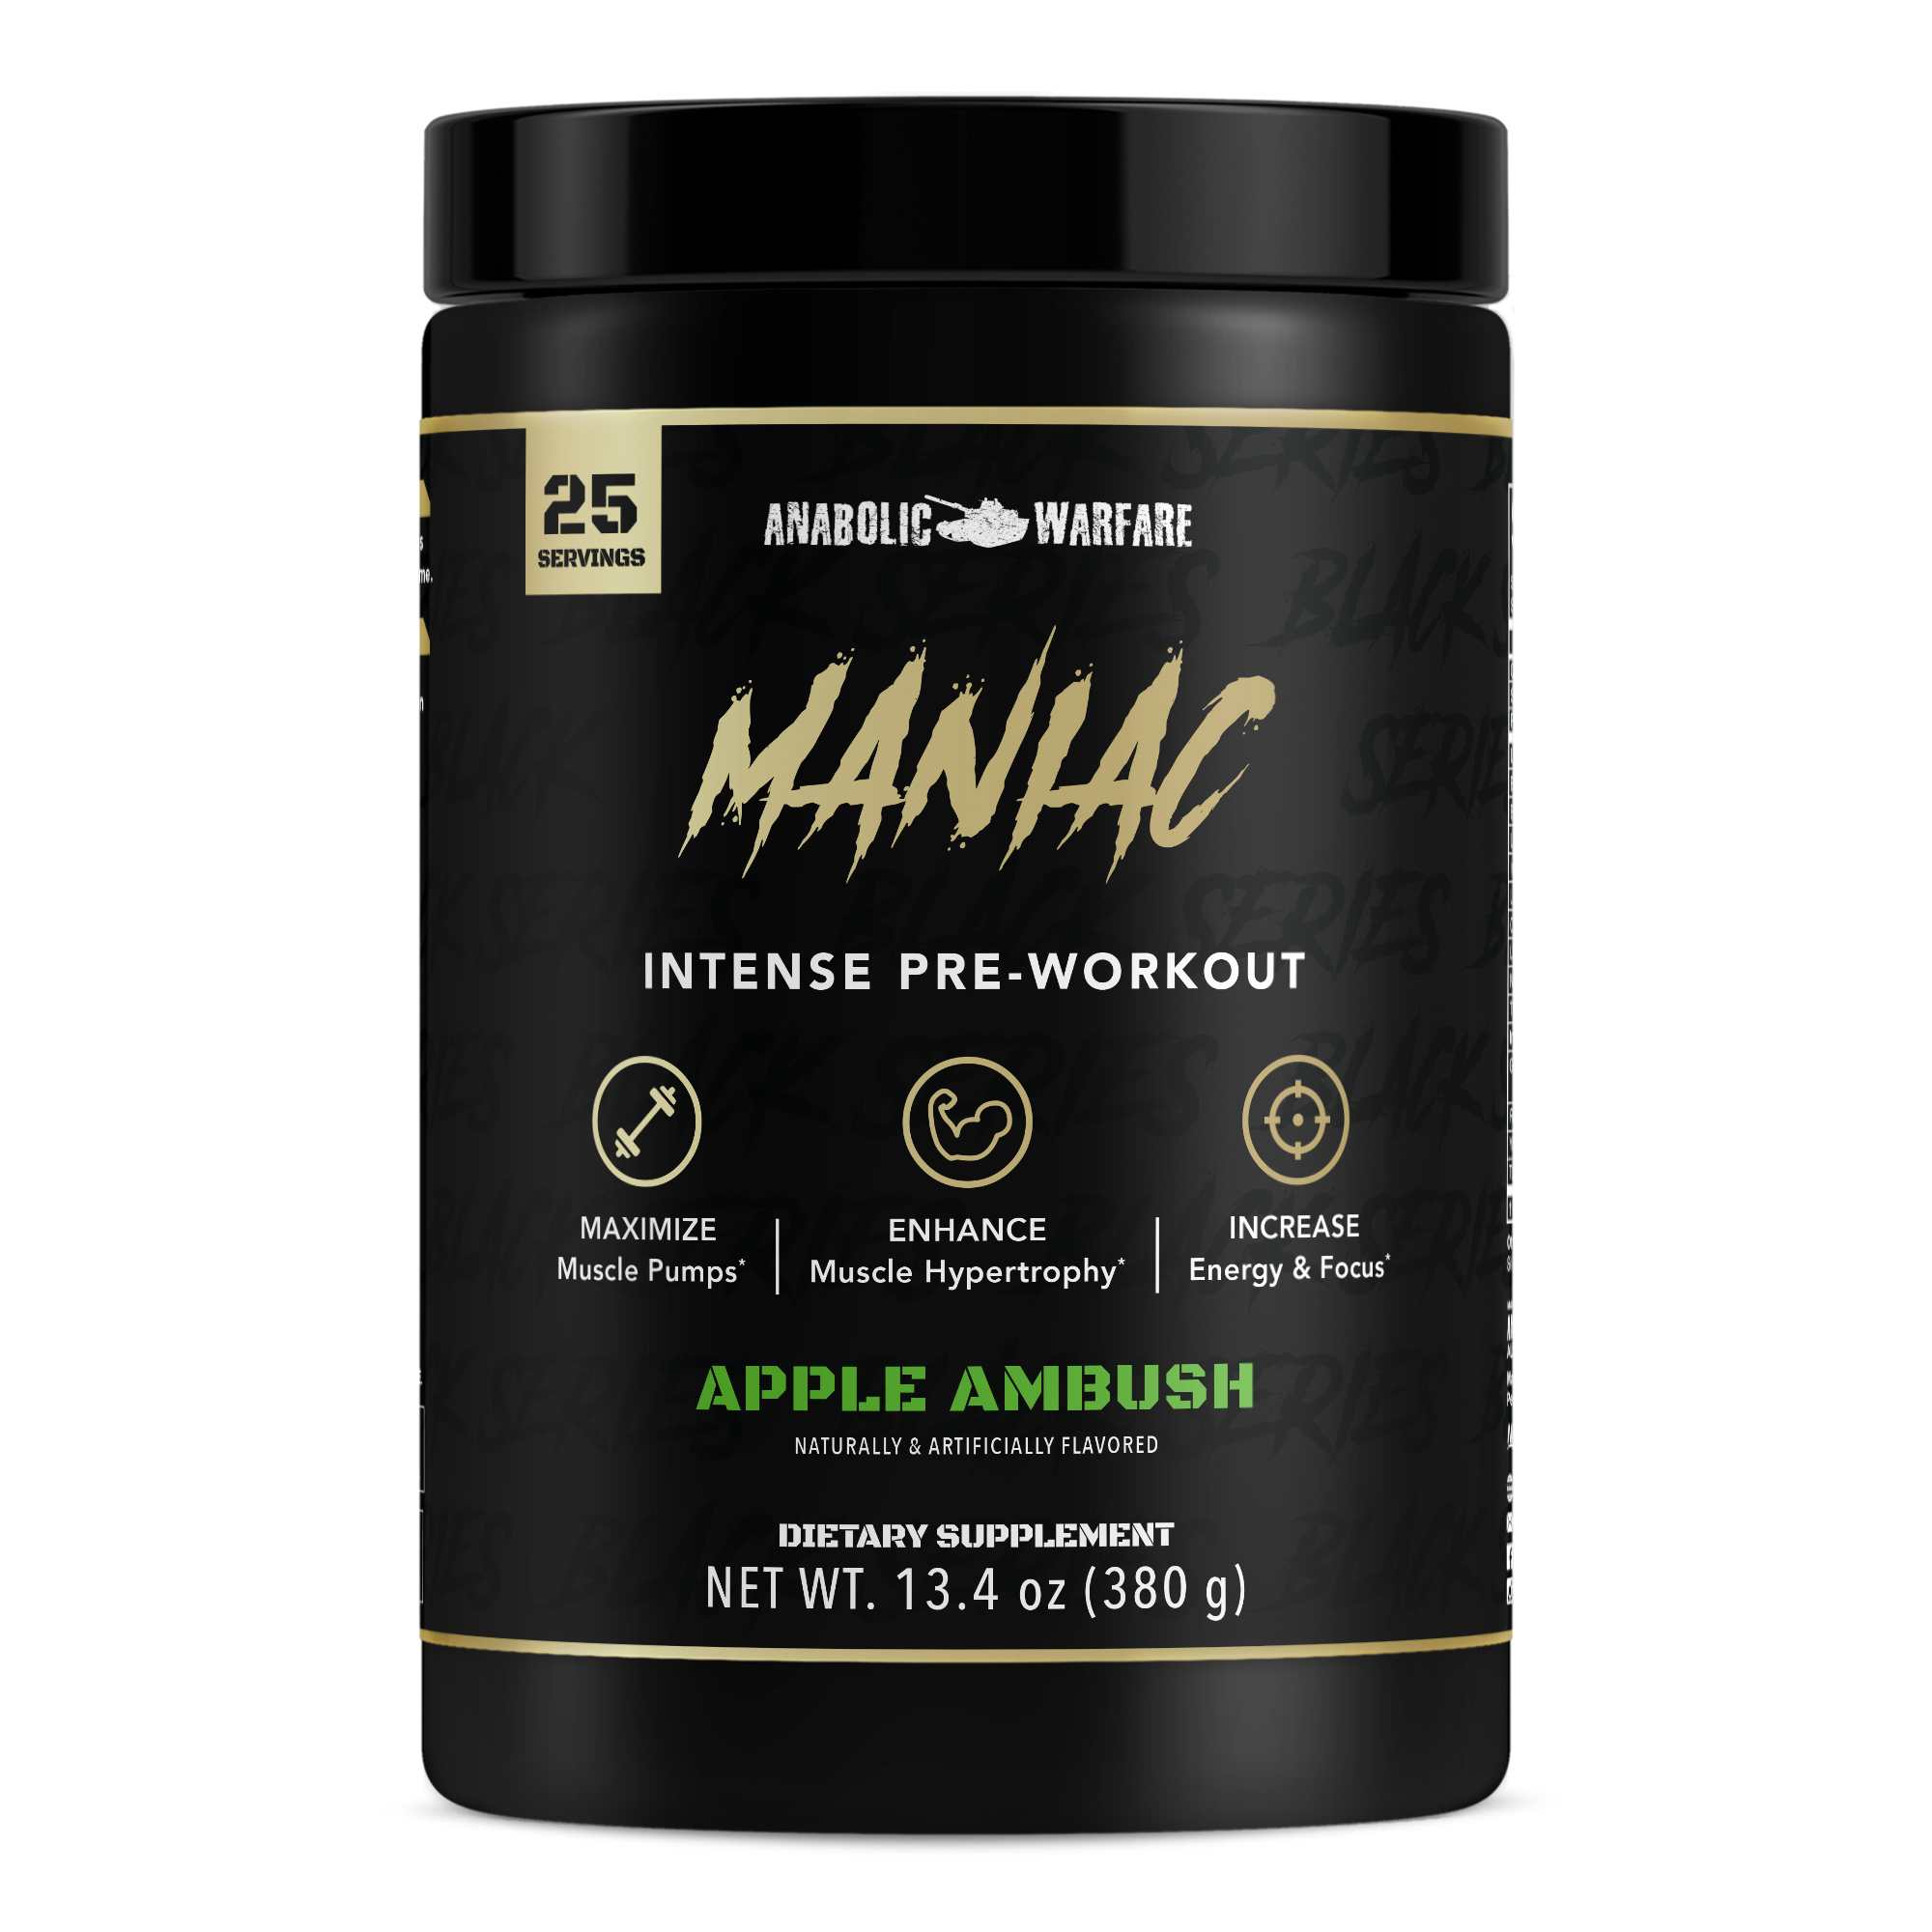 25 I S SERVINGS INTENSE PRE-WORKOUT MAXIMIZE ENHANCE INCREASE Muscle Pumps Muscle Hypertrophy RS APPLE AMBUSH NATURALLY ARTIFICIALLY FLAVORED LU A VA TR M NET WT. 13.4 oz 380 g 